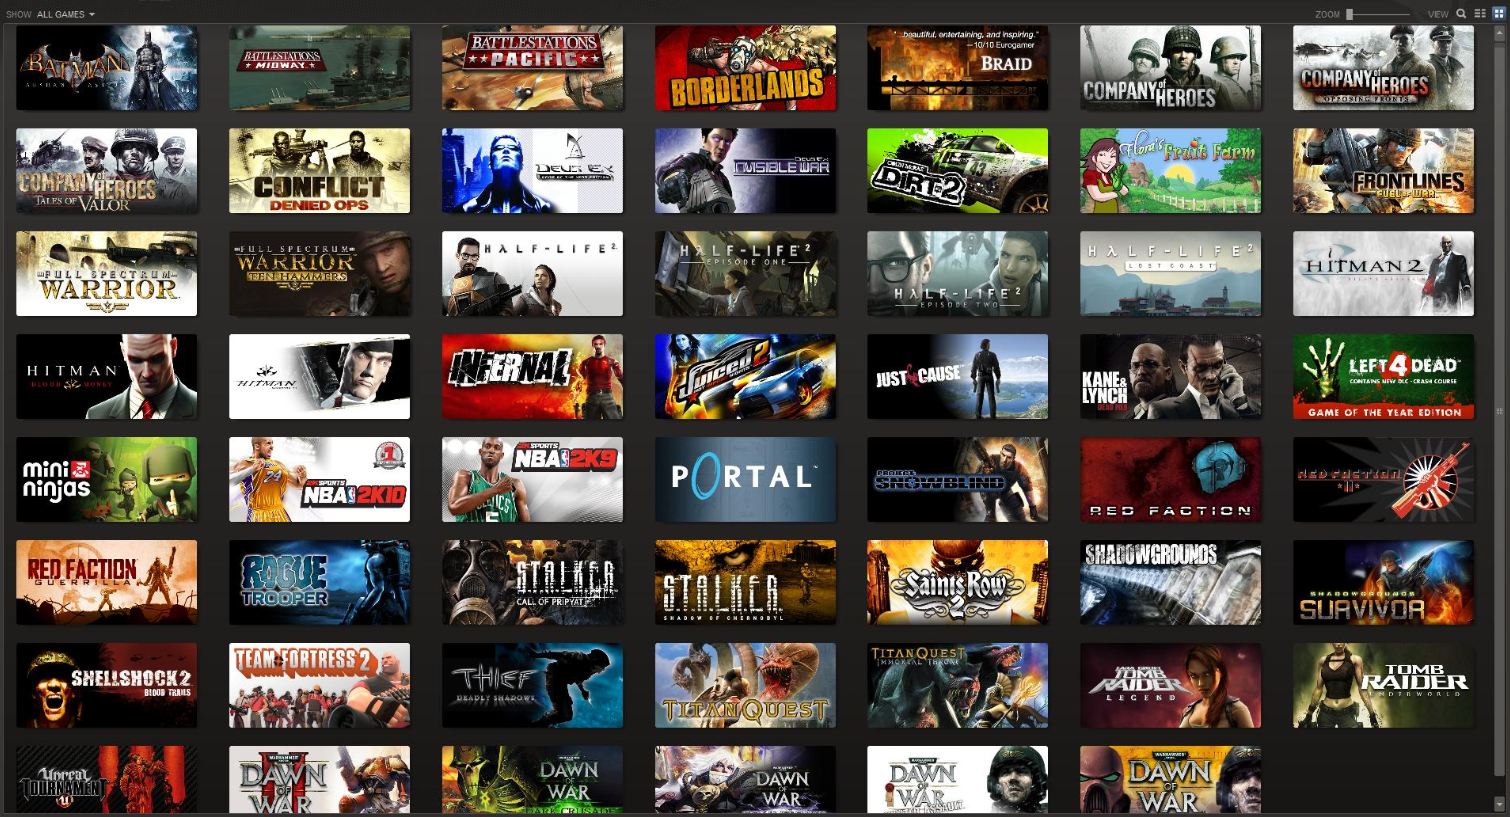 How To Get FREE All Paid Steam Games the legal way